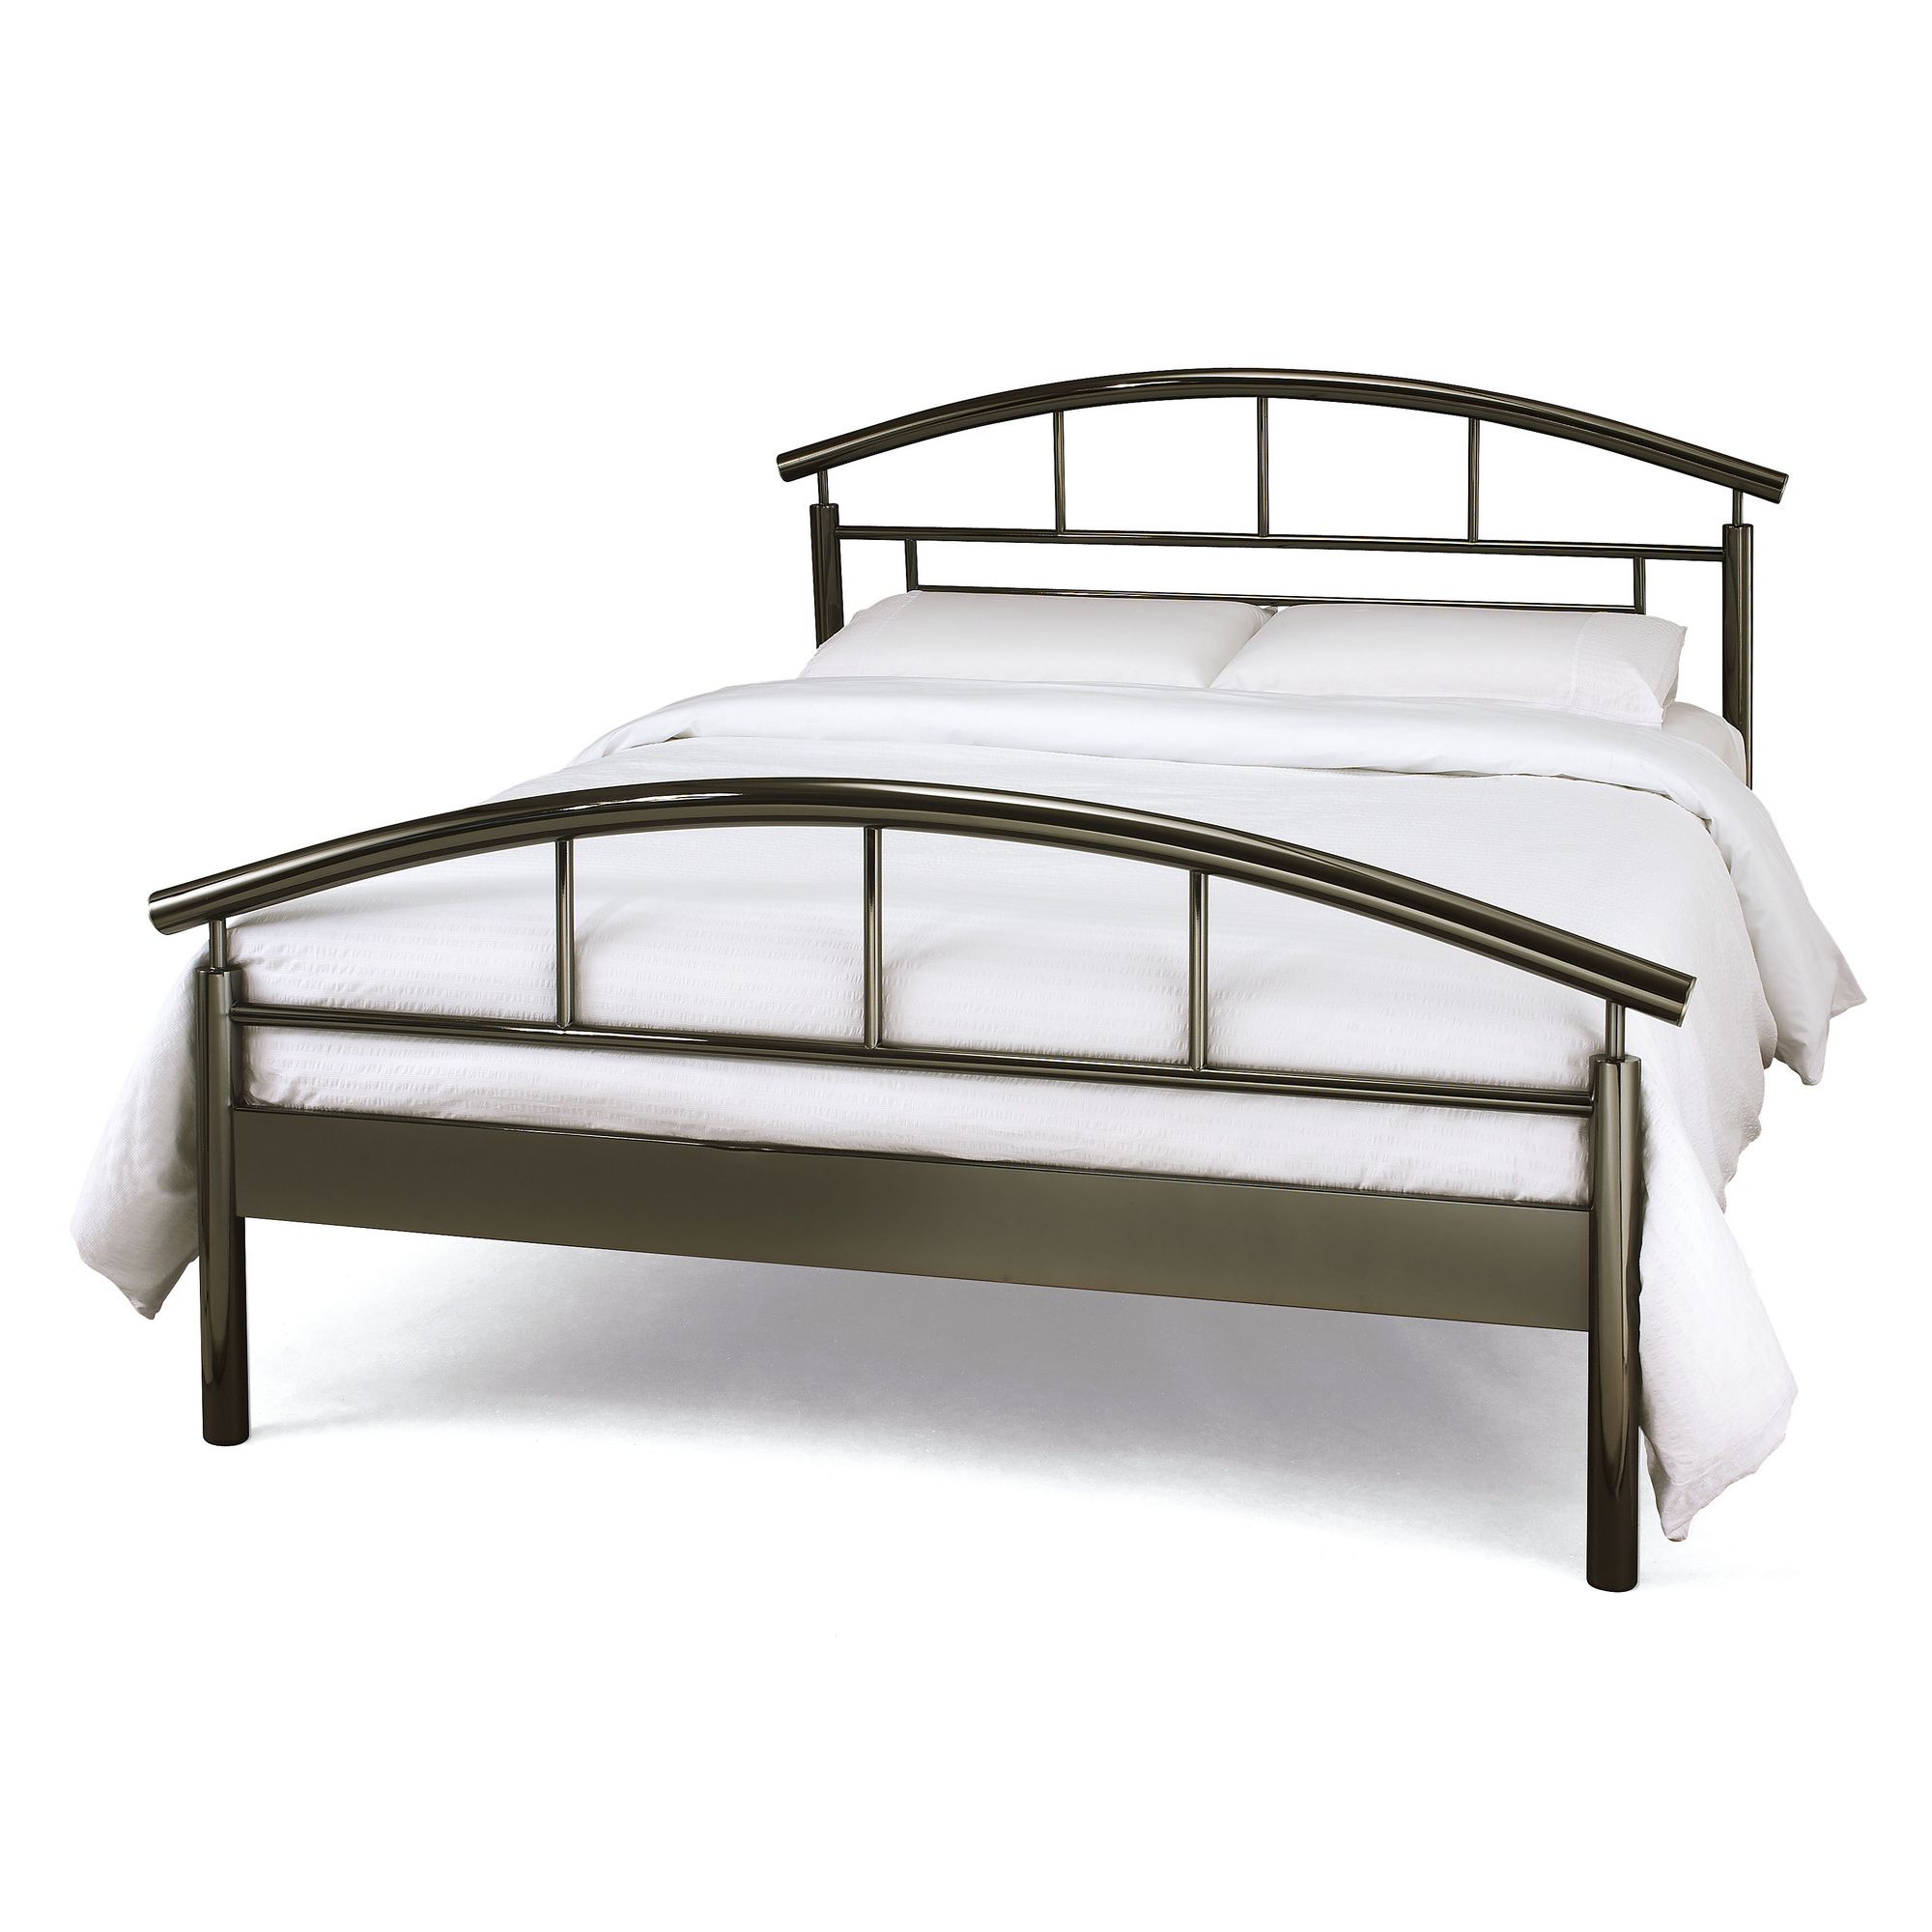 Serene Furnishings Calypso Bed Frame - Double at Tesco Direct